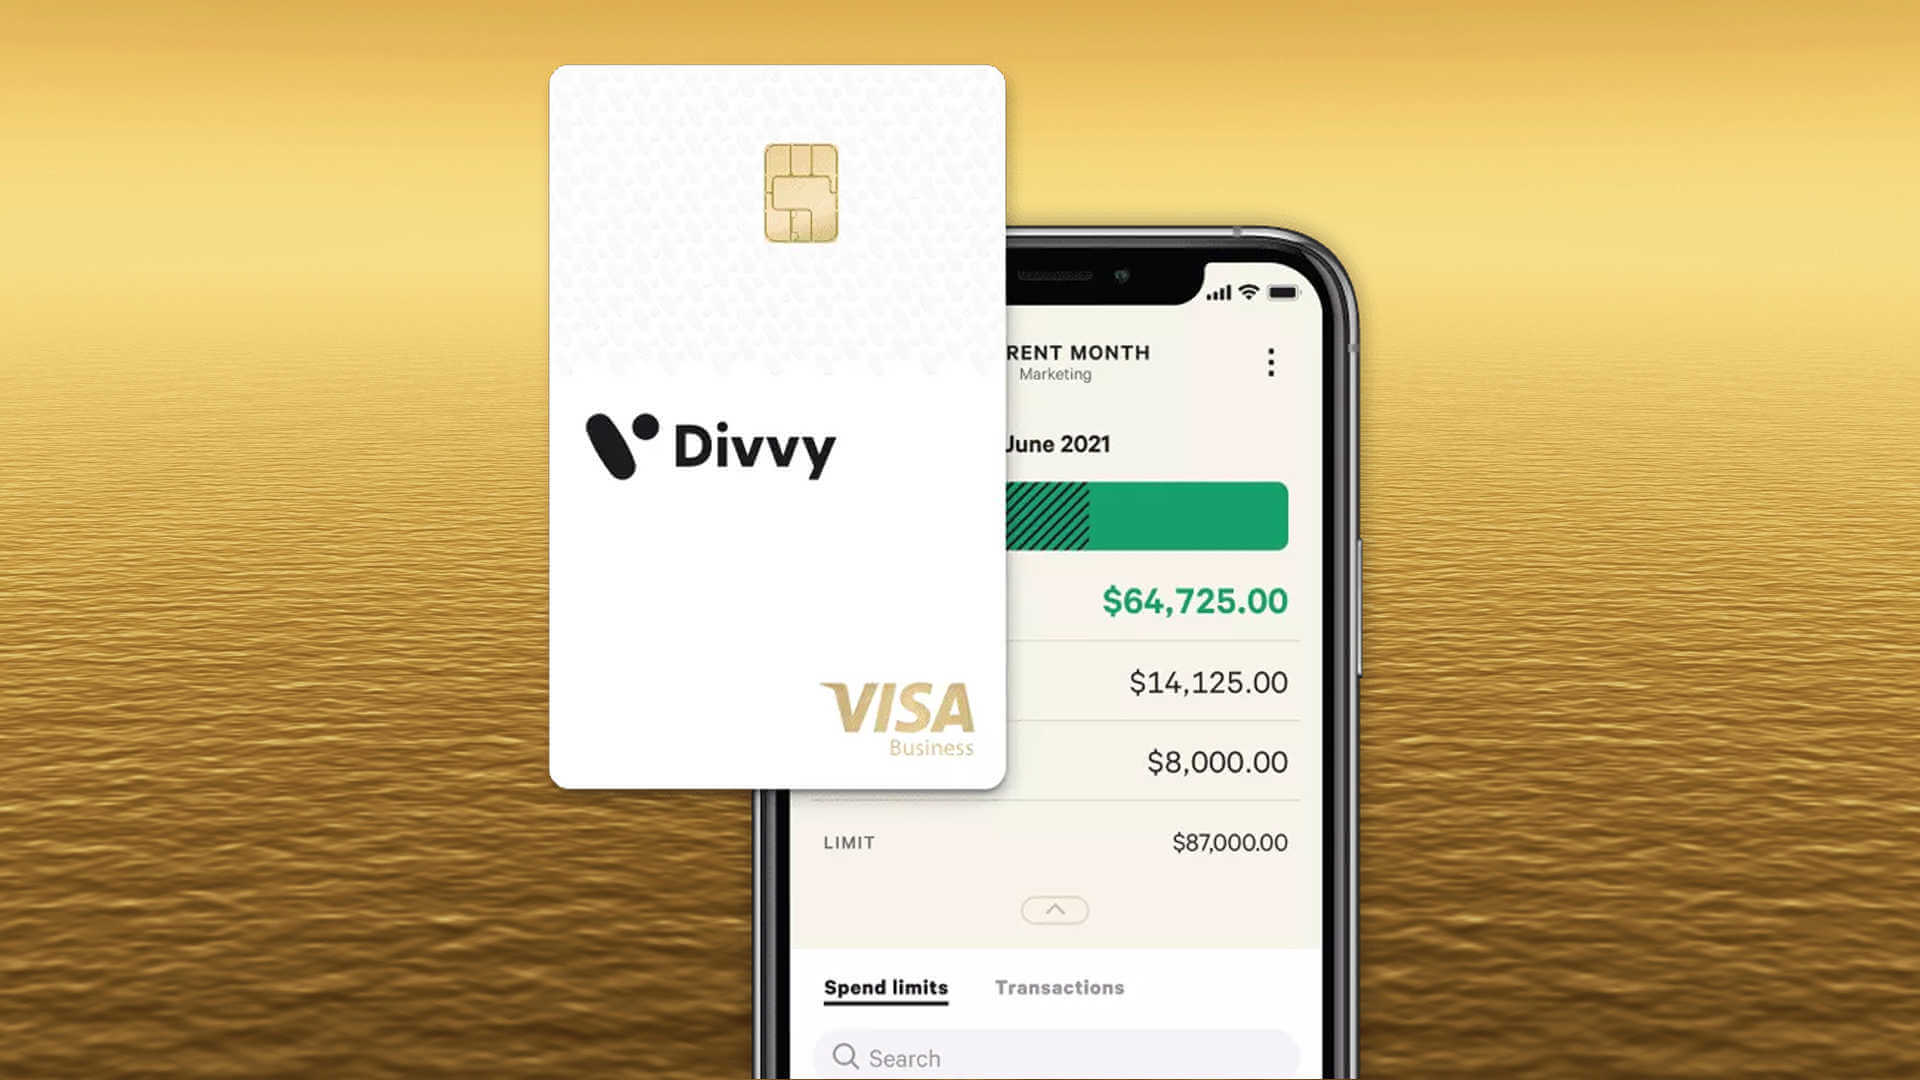 What Credit Score Do You Need For Divvy